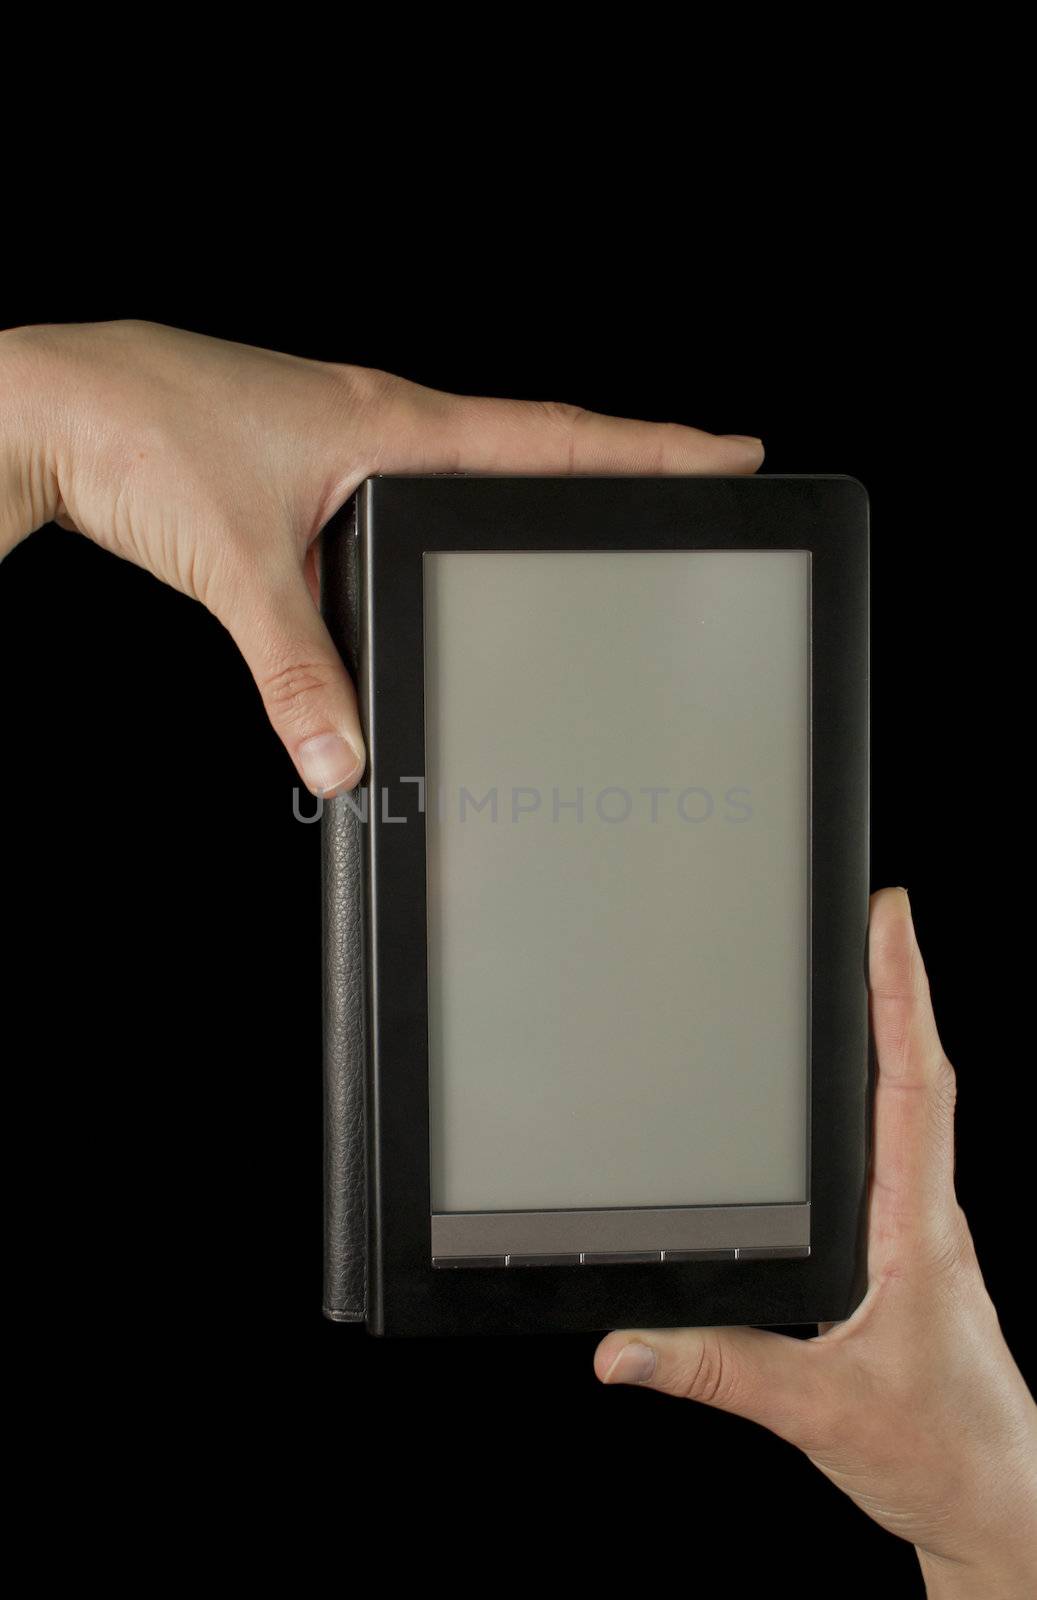 Hands holding an electronic book reader on the black background by AndreyKr